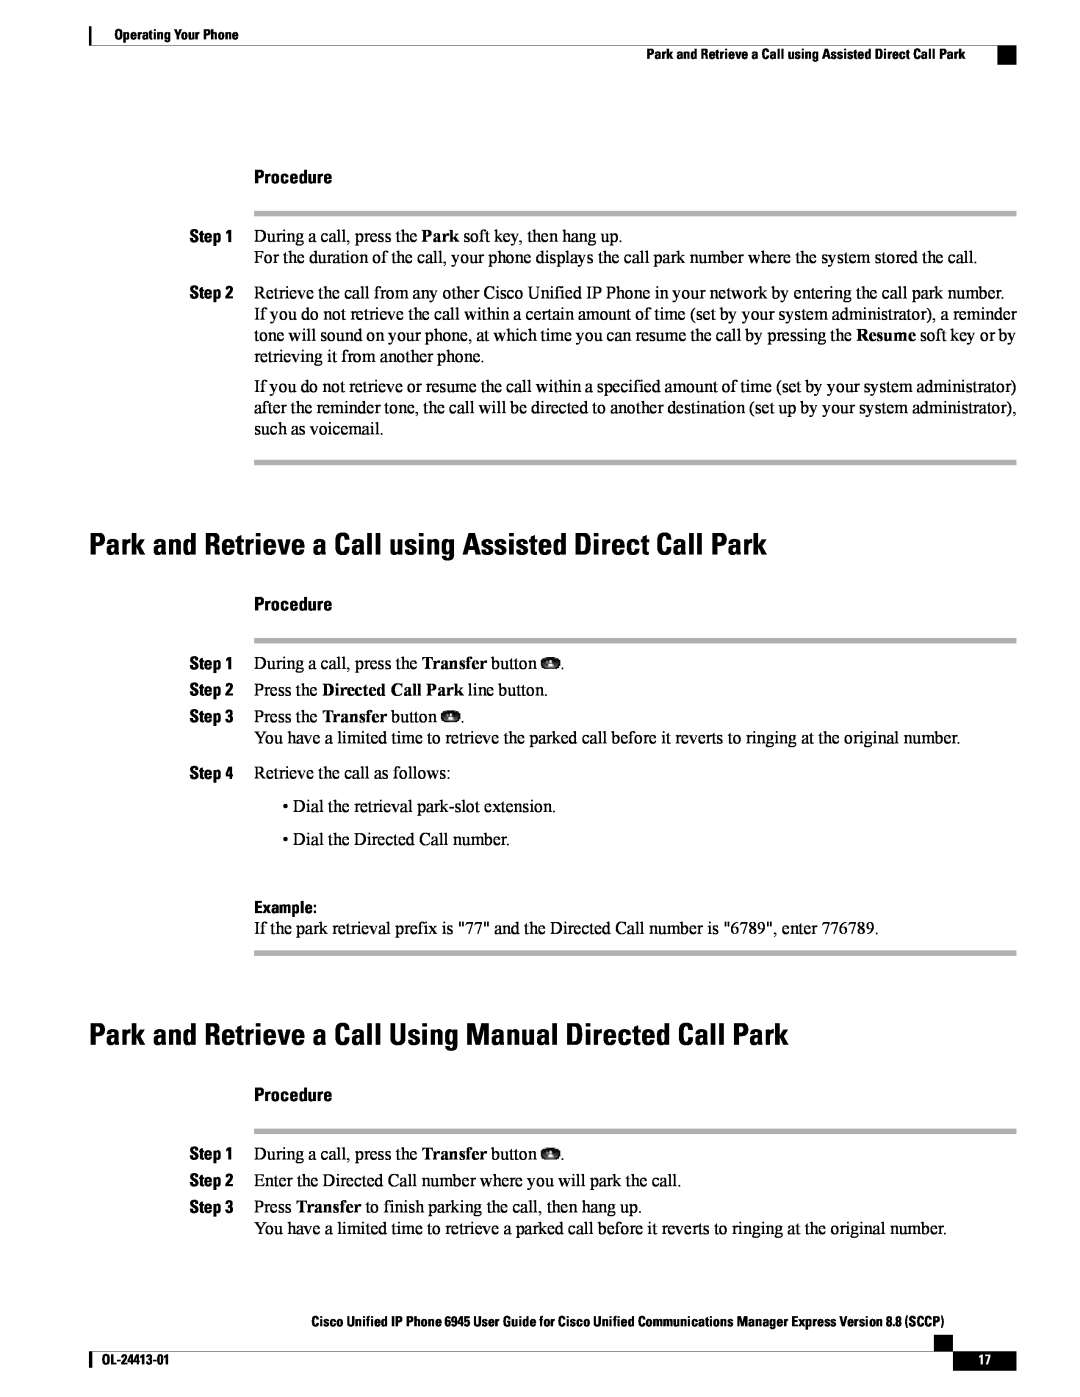 Cisco Systems 6945 manual Park and Retrieve a Call using Assisted Direct Call Park, Example, Procedure 